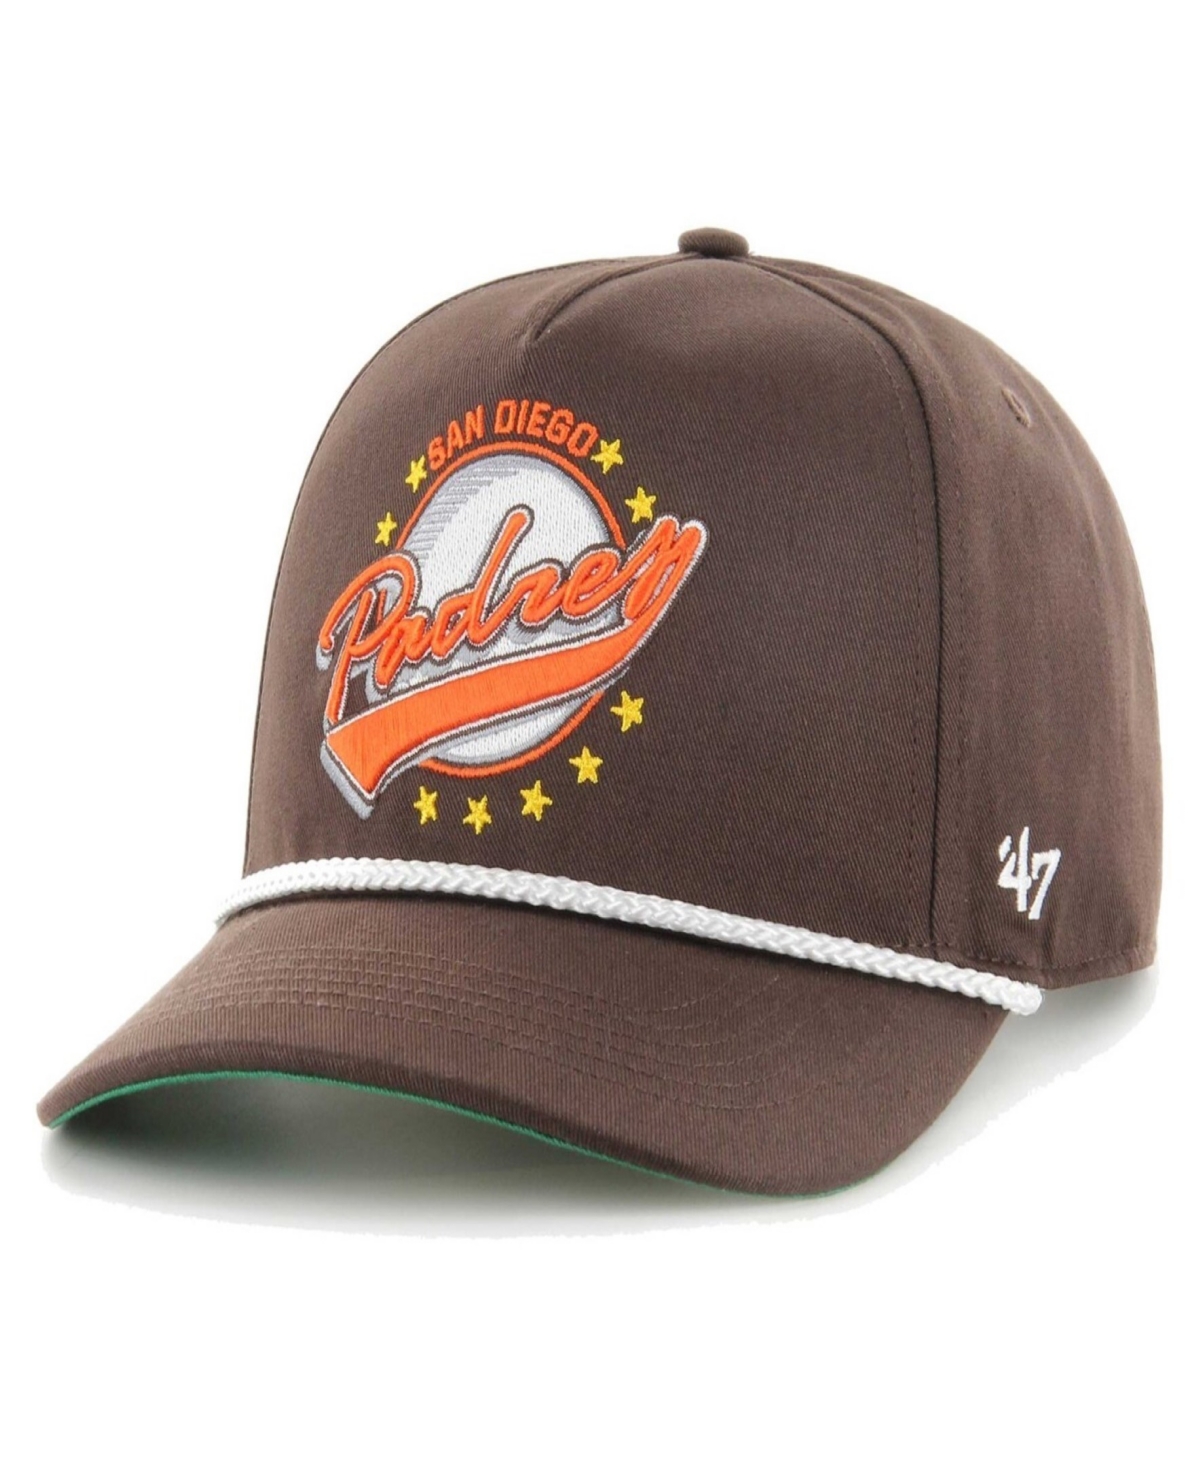 47 Brand Men's Brown San Diego Padres Wax Pack Collection Premier Hitch Adjustable Hat - Brown